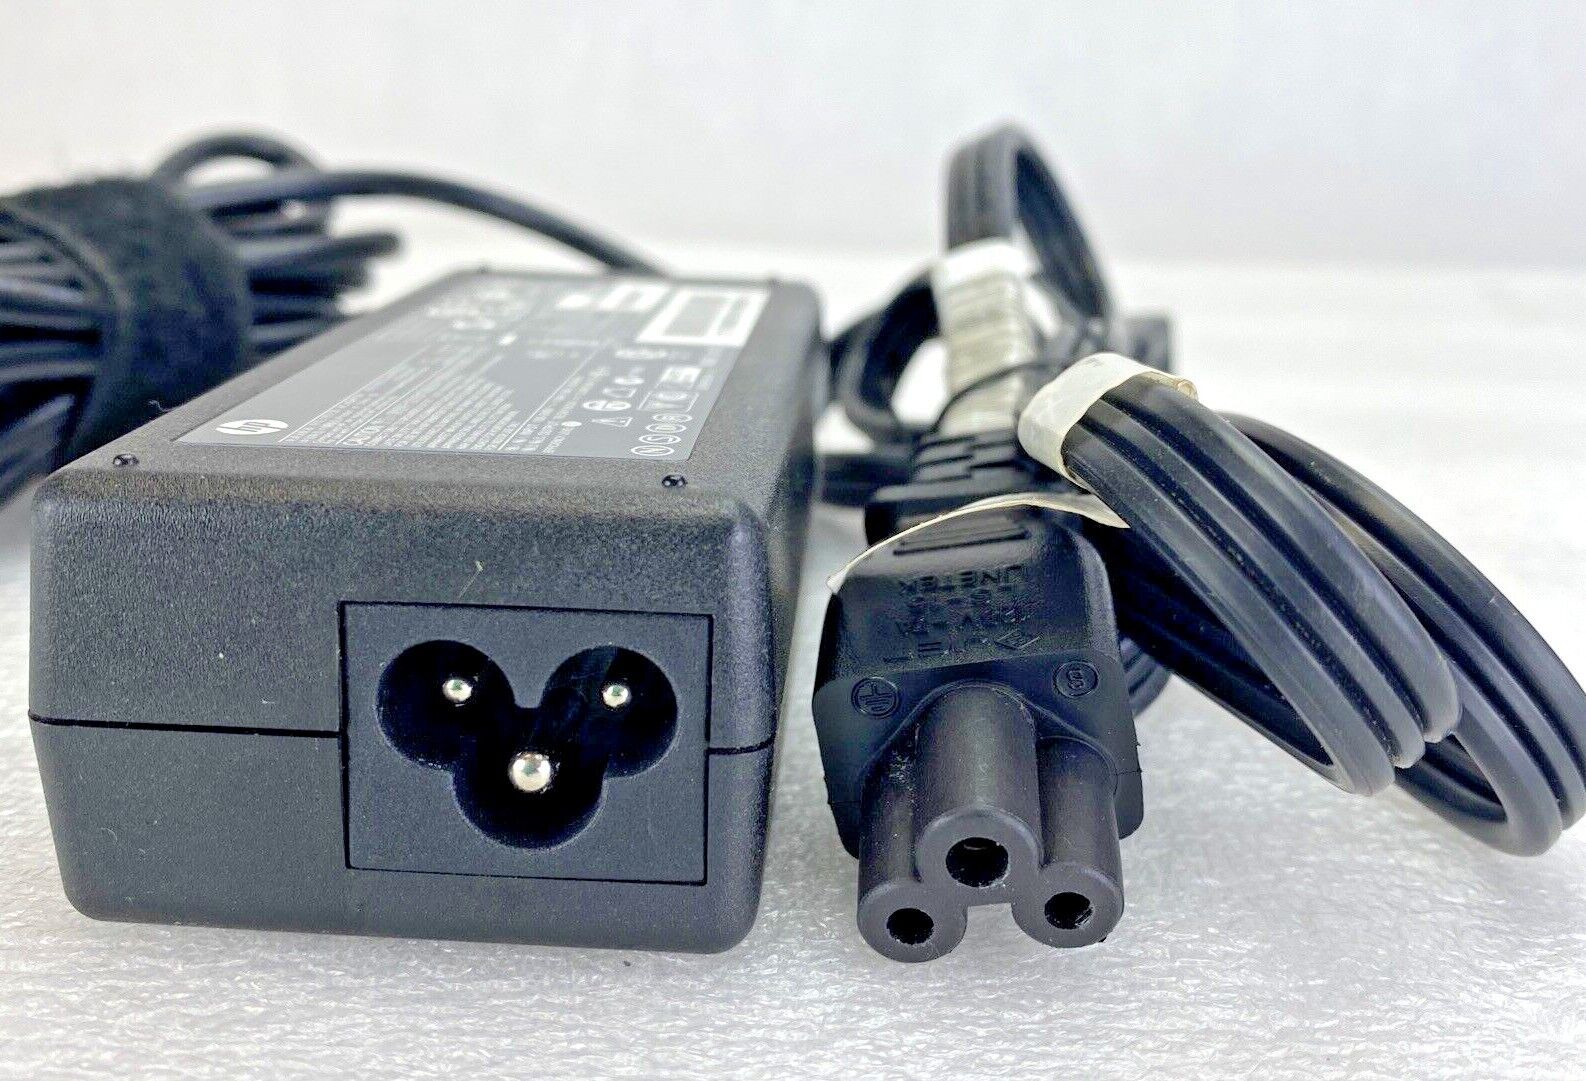 genuine HP 384019-002 laptop charger AC power adapter 391172-001 18.5V 3.5A 65W